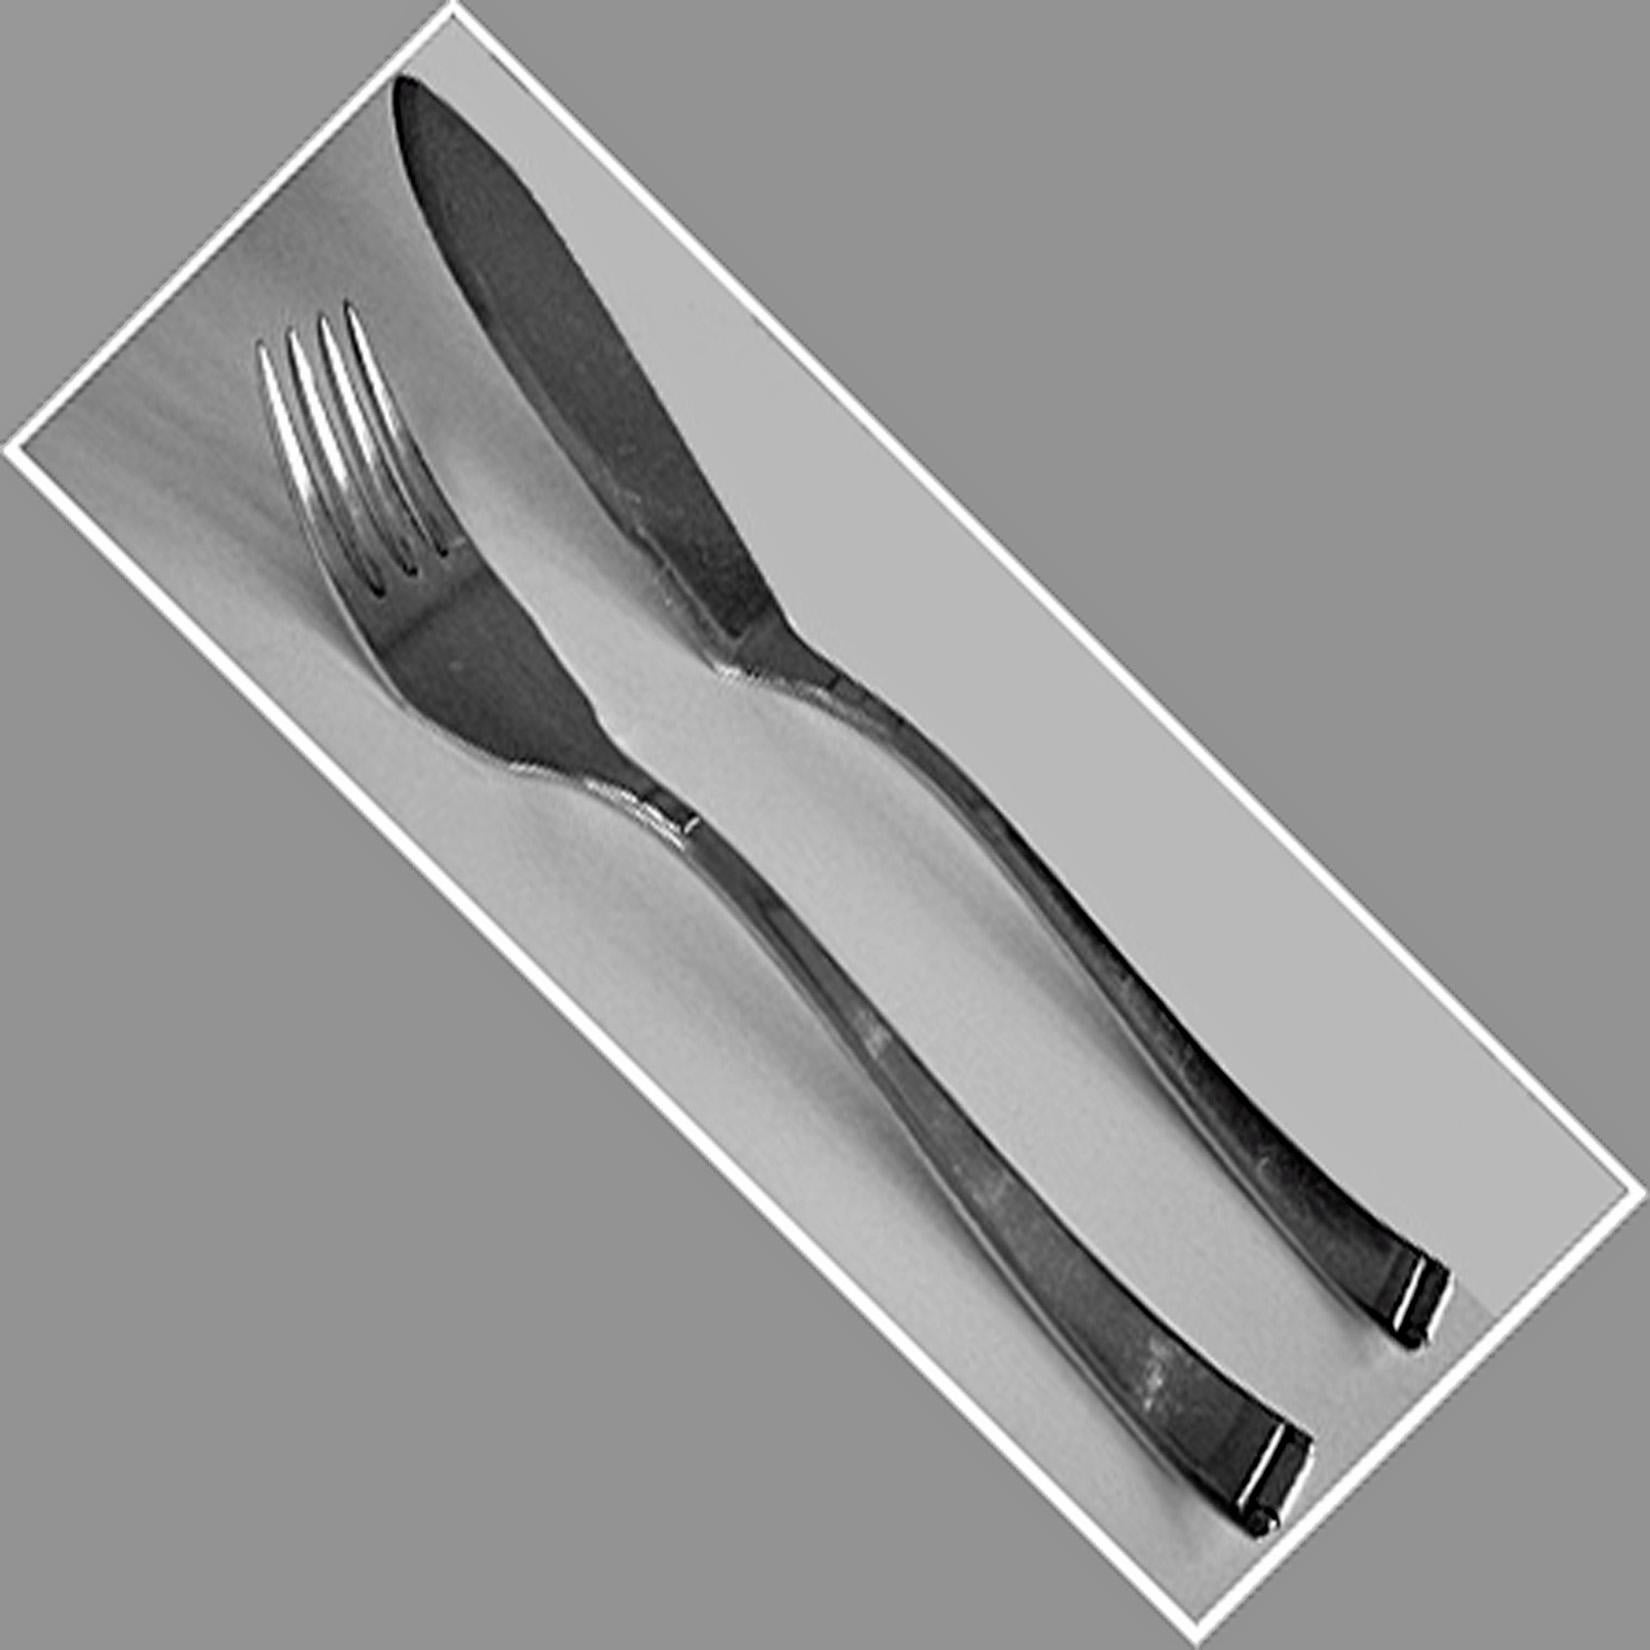 Antique silver Art Deco fish service for 12, Germany, circa 1920. The service comprising 12 fish knives and 12 fish forks all of a plain tapering art deco simple ridge design. Length of Fork: 7 inches. Length of Knife: 8 .25 inches. Total Service